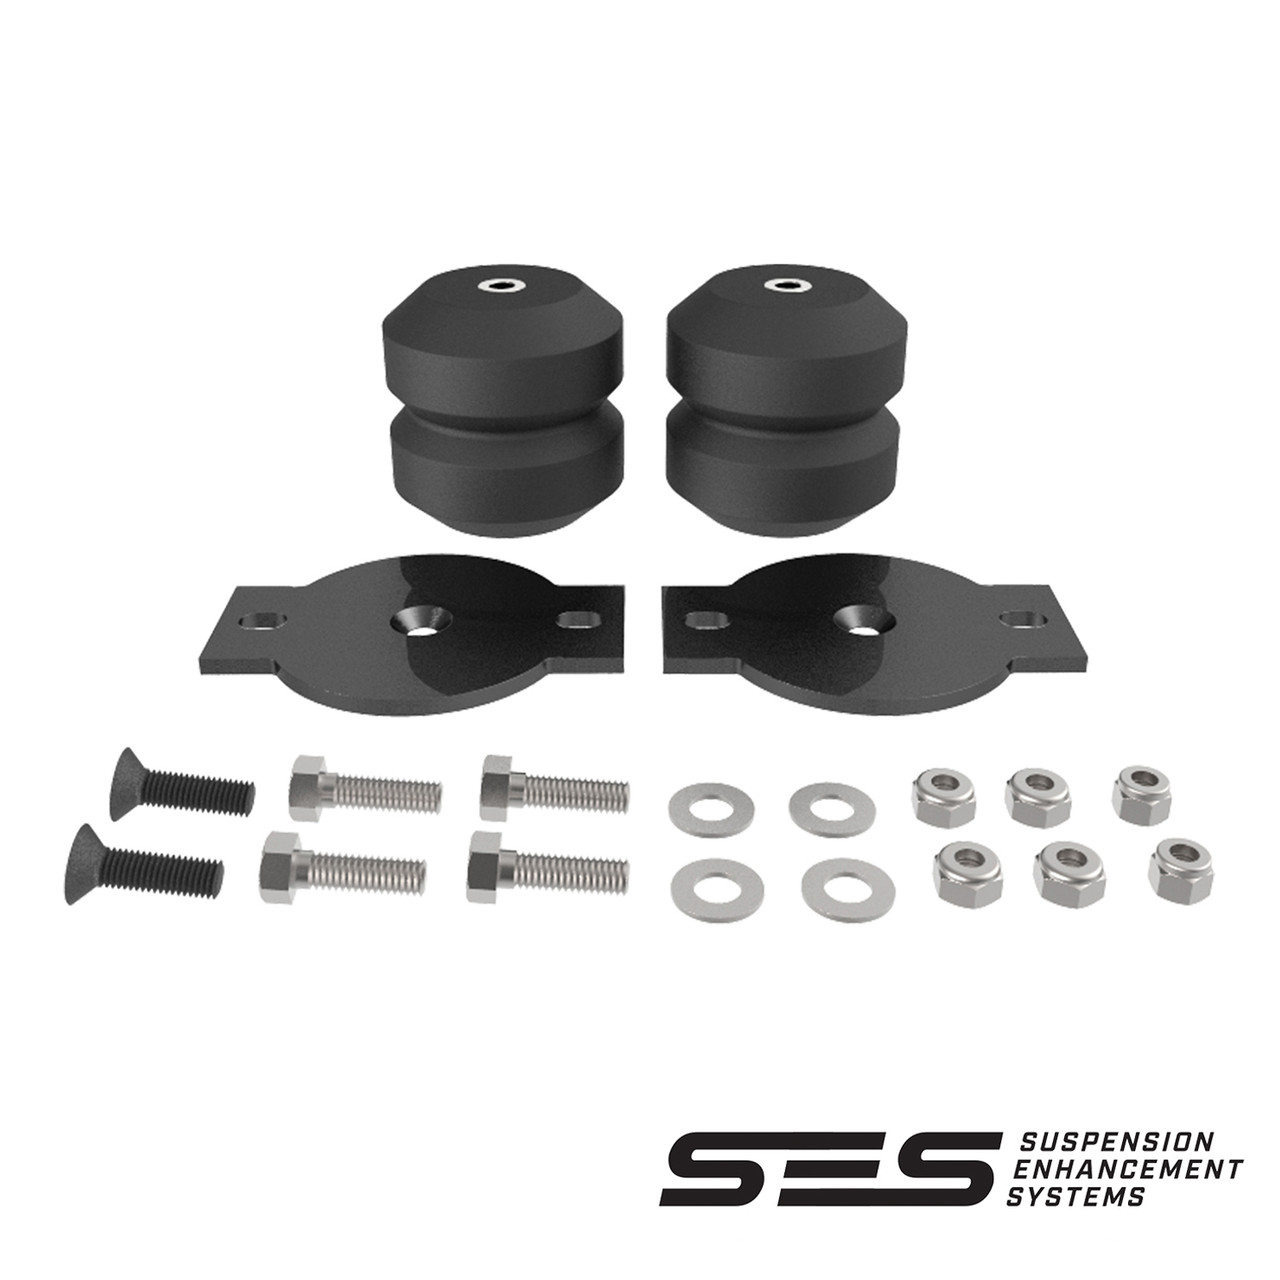 Timbren FF350SD4 Suspension Enhancement Kit for 99-04 Ford F250 F350 Superduty